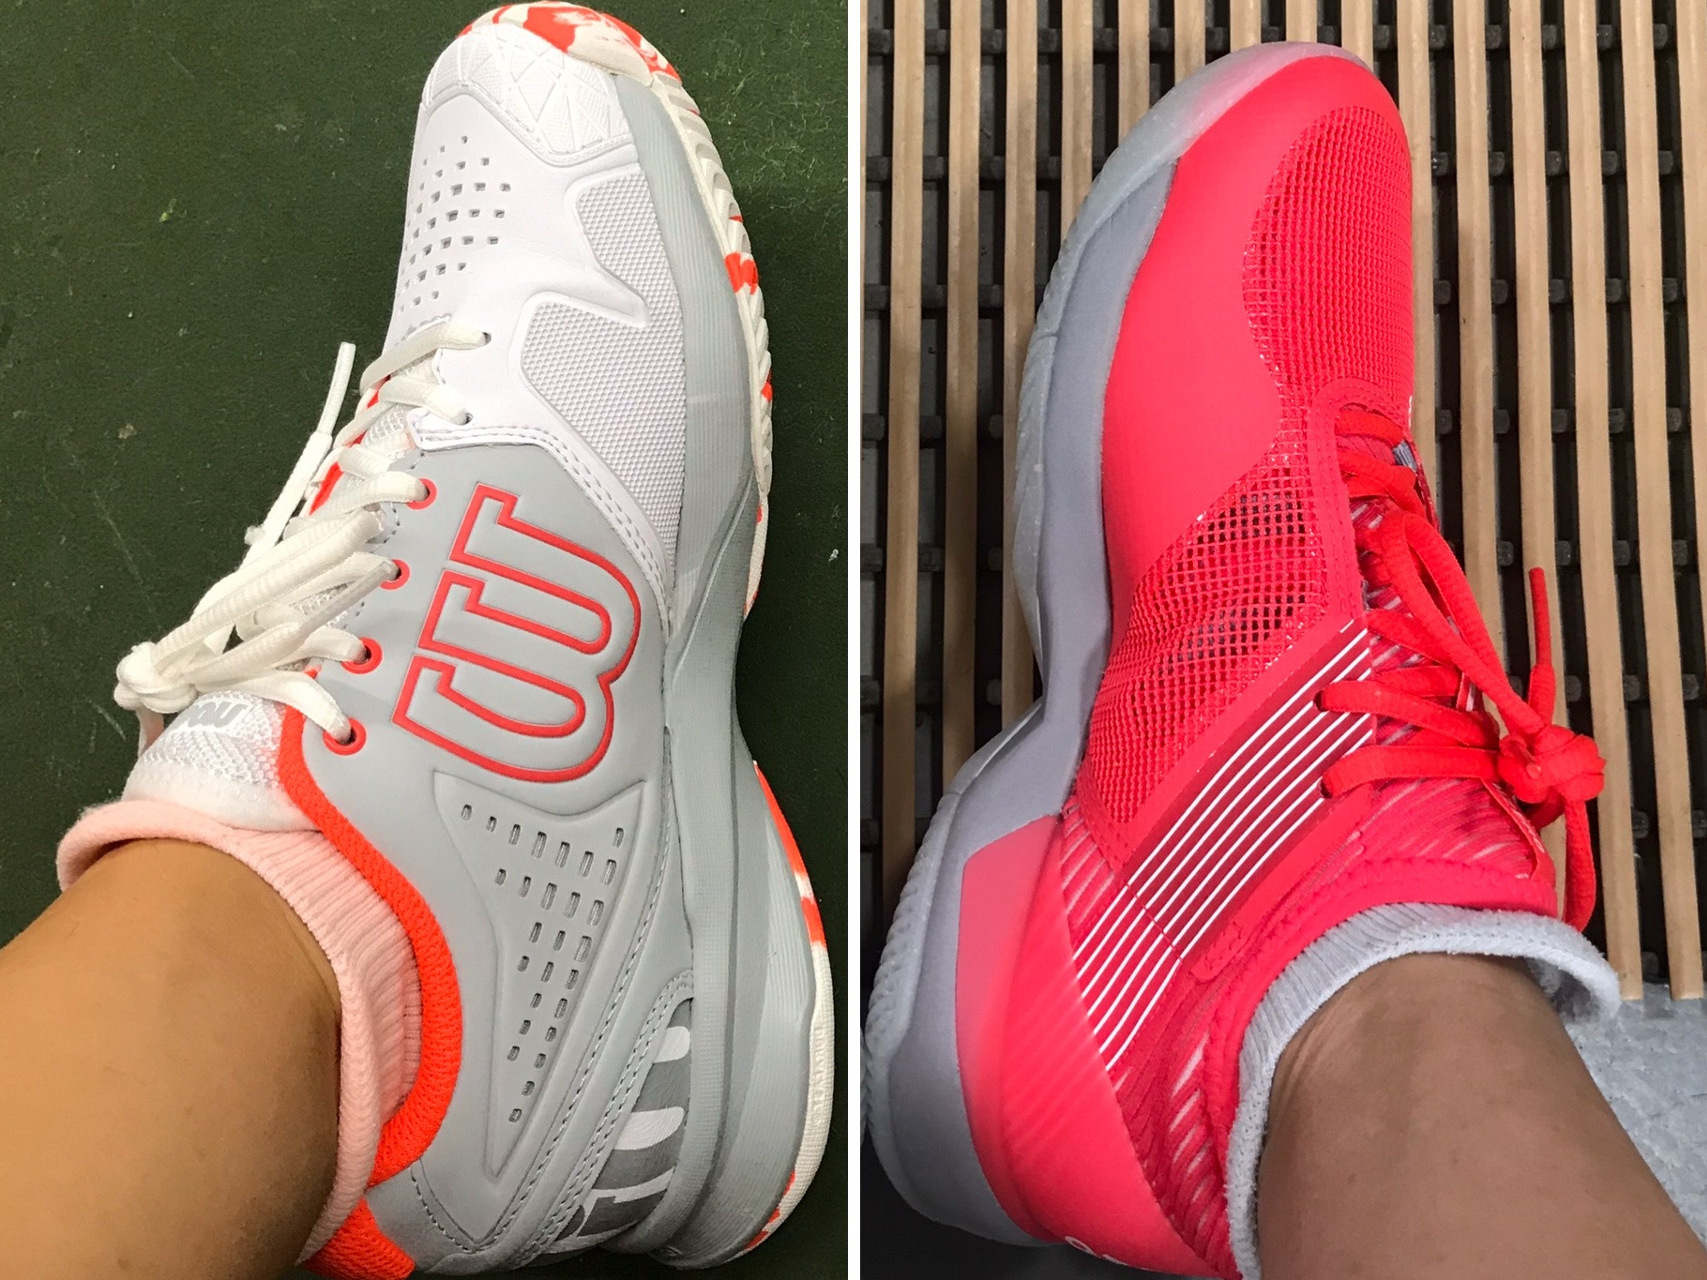 Do you really need tennis shoes? Here's all I wish I had known